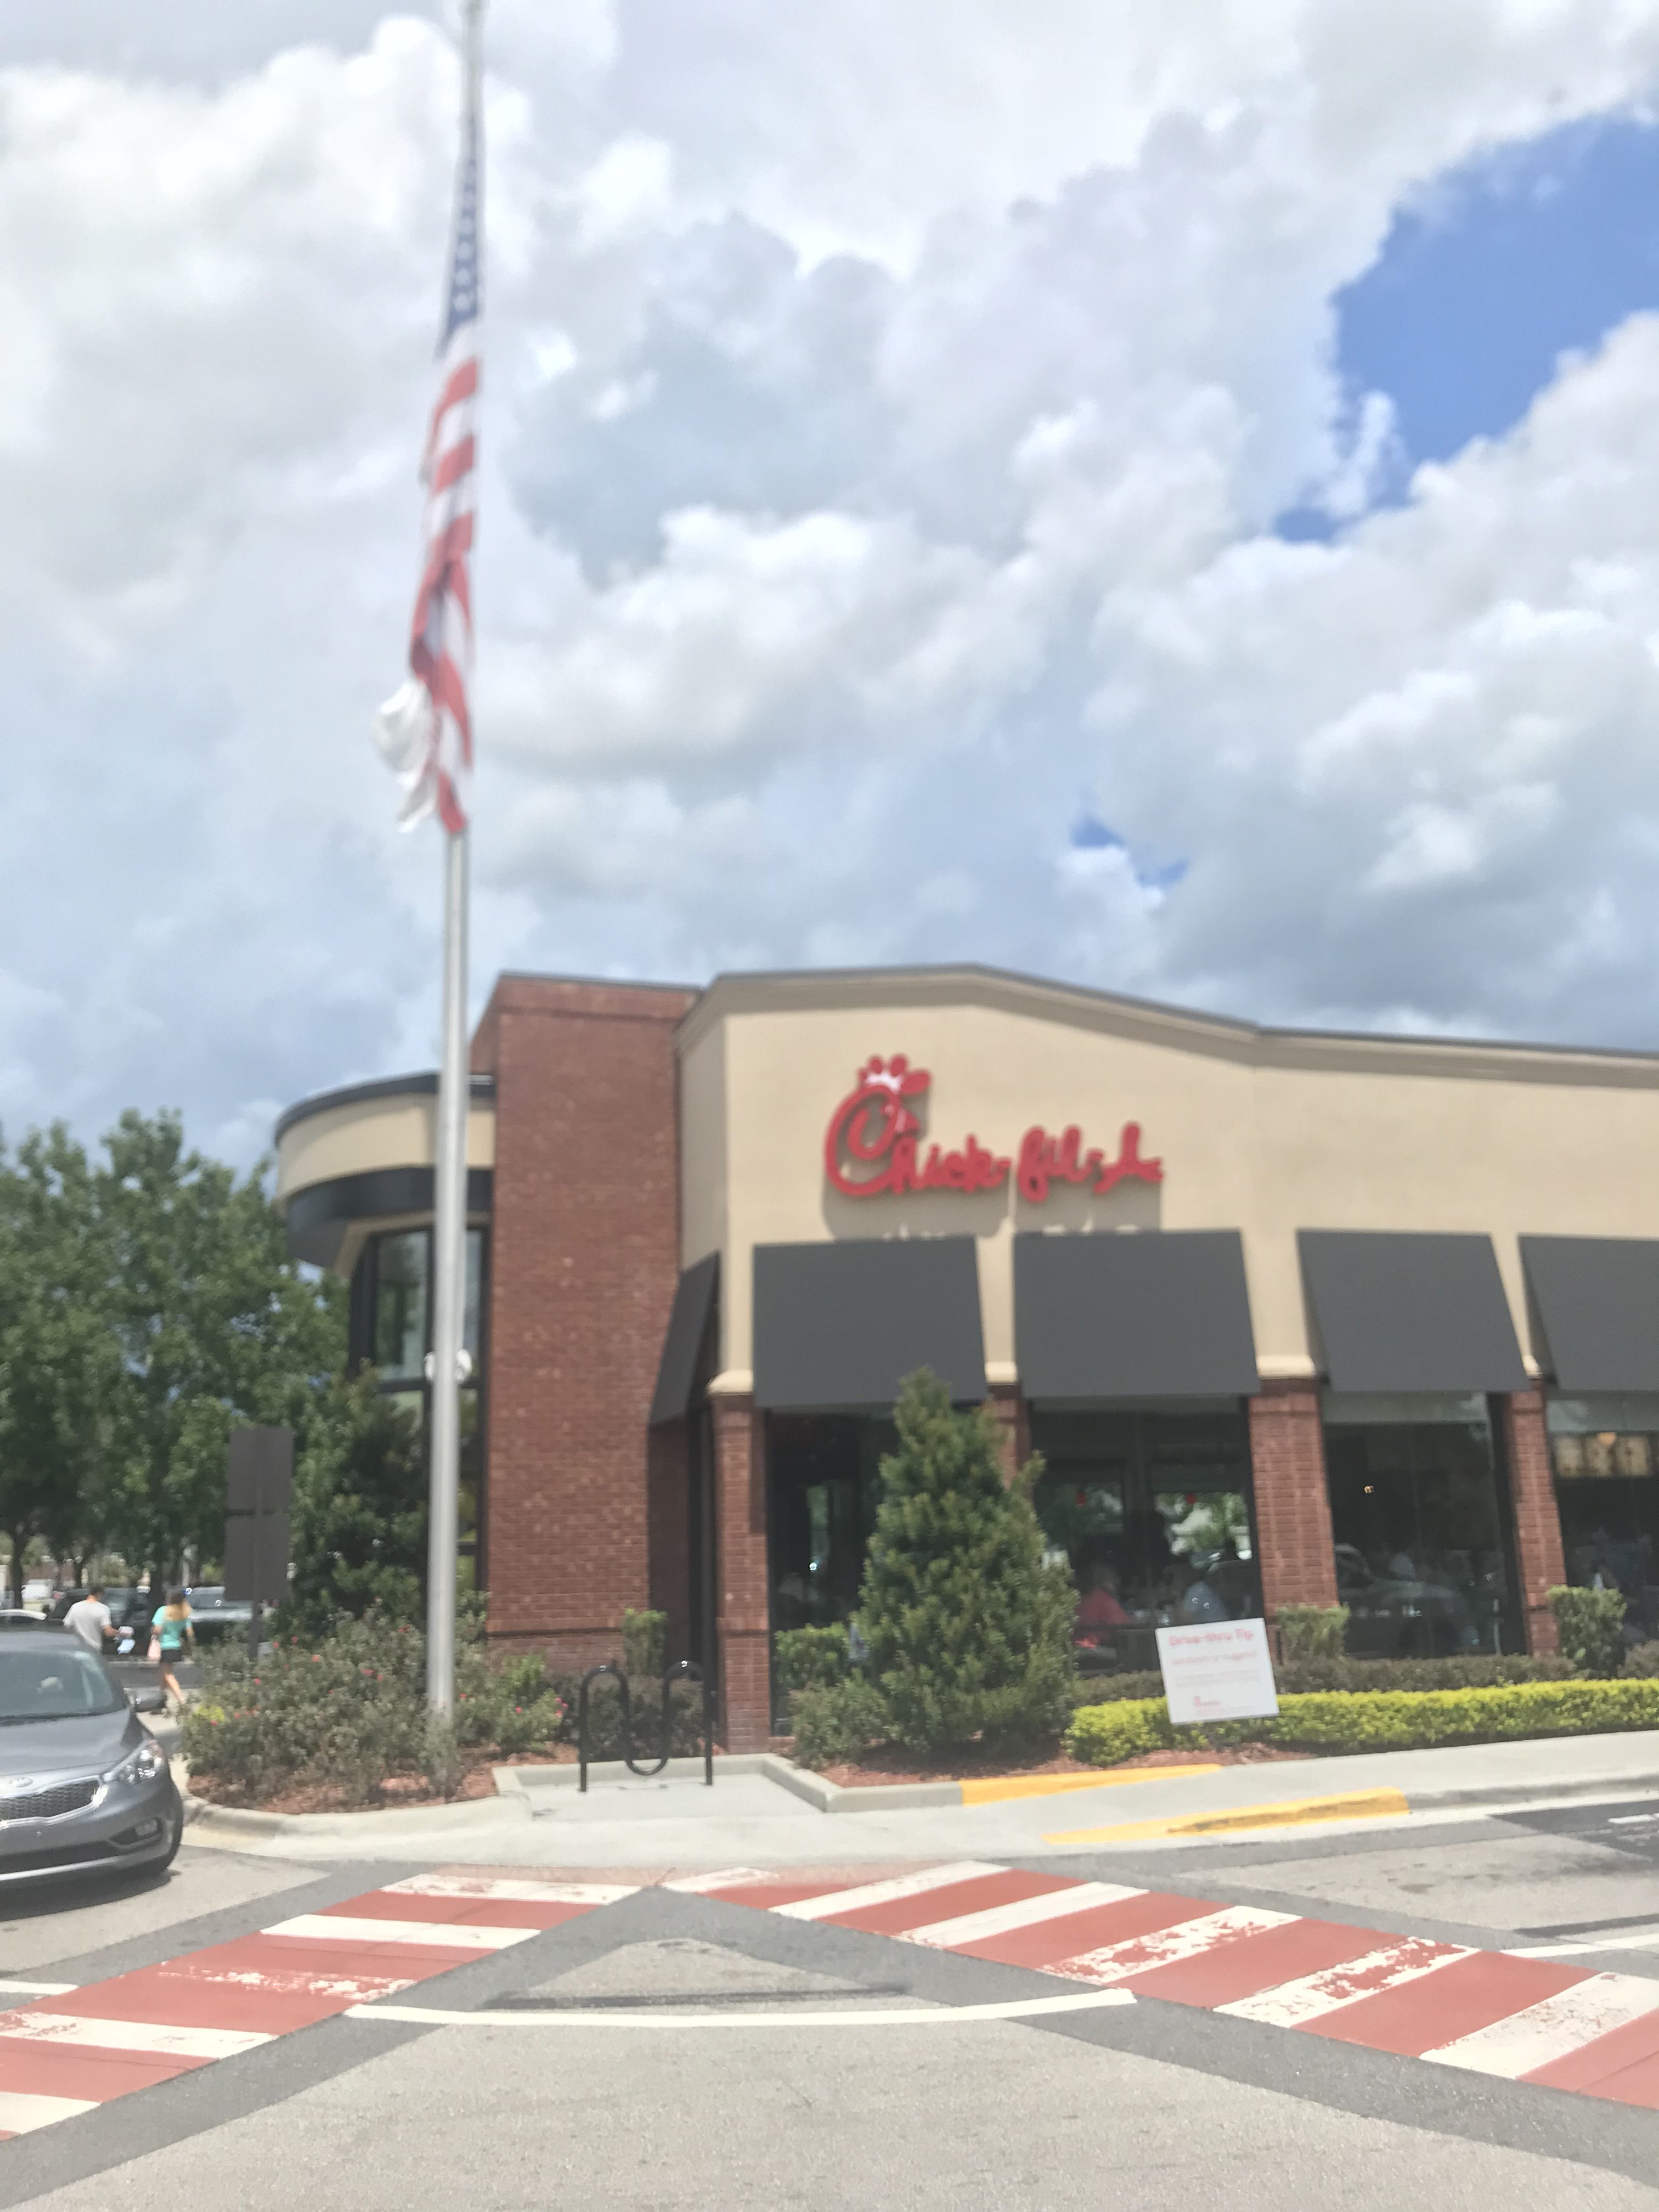 Find out how you can get over $50 dollars of Chick-Fil-A ...